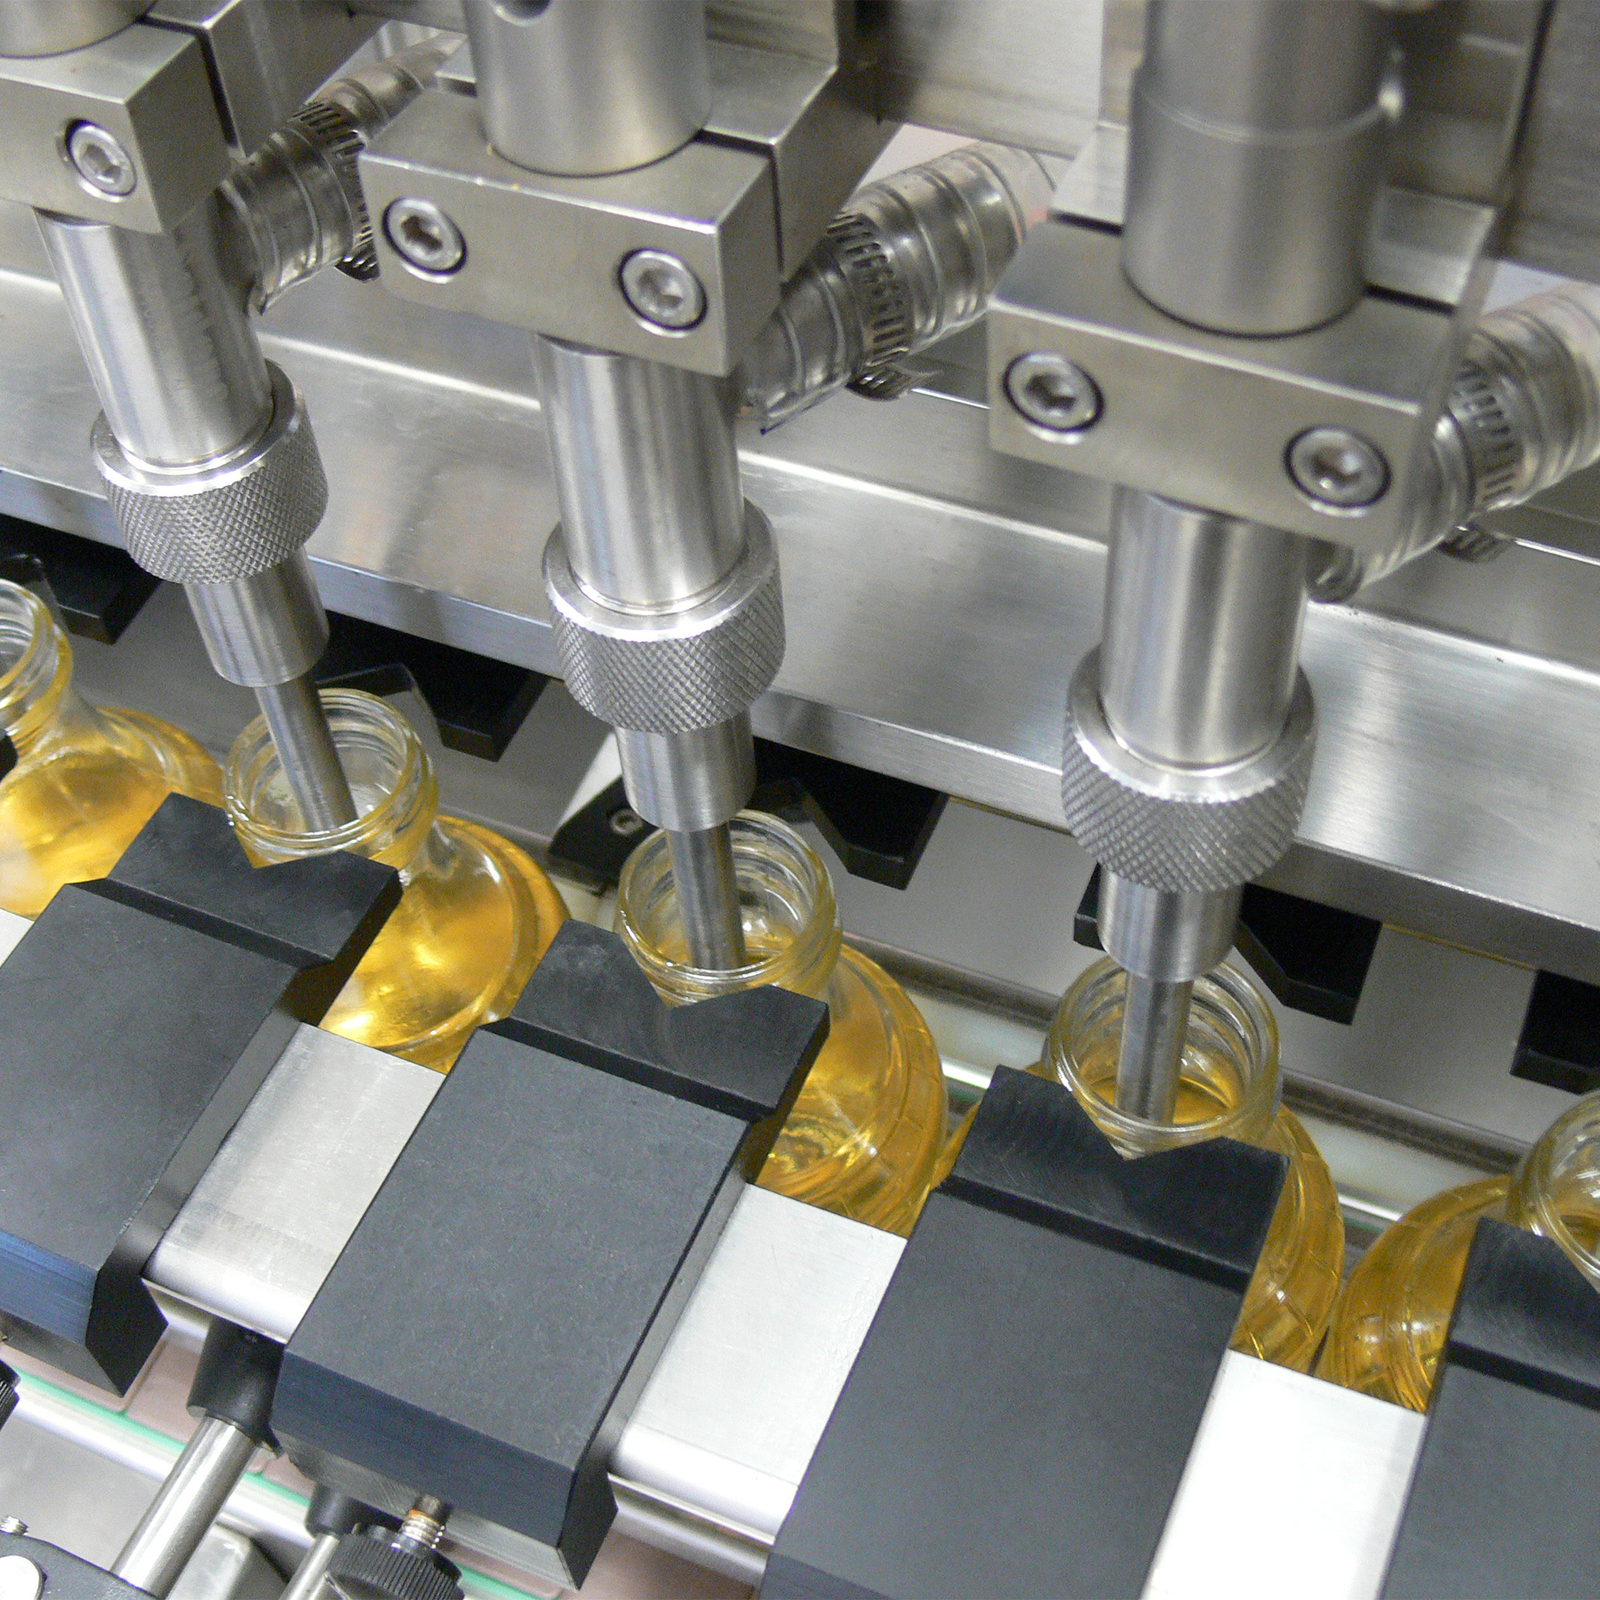 closeup of the heads of the inline liquid filling system machine dispensing a yellow liquid into clear glass containers.